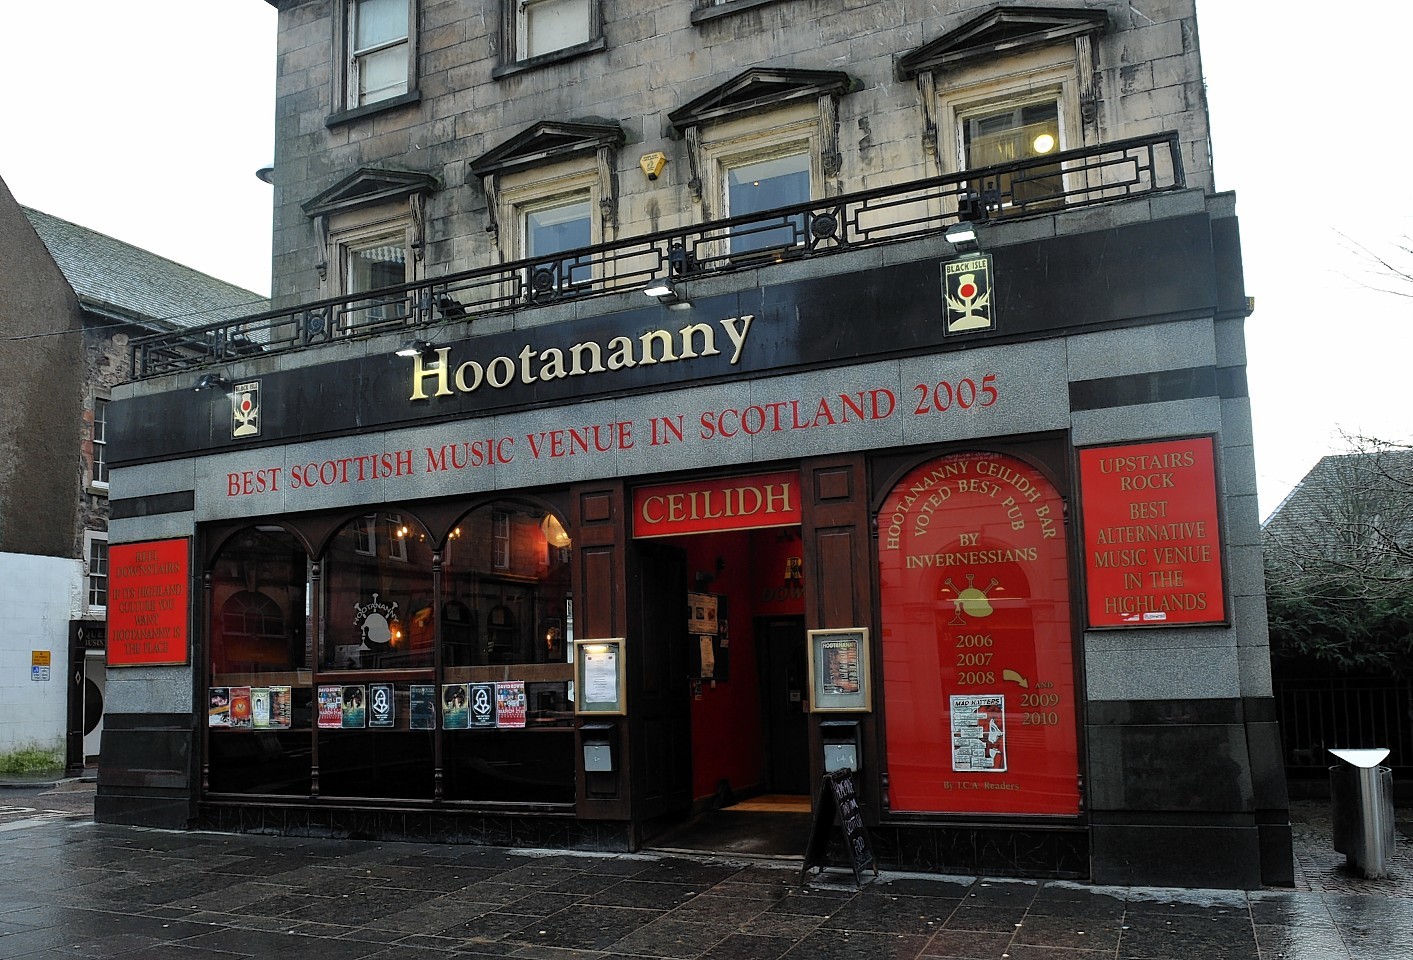 A man has been reported in connection with an alleged assault at Hootanny in Inverness